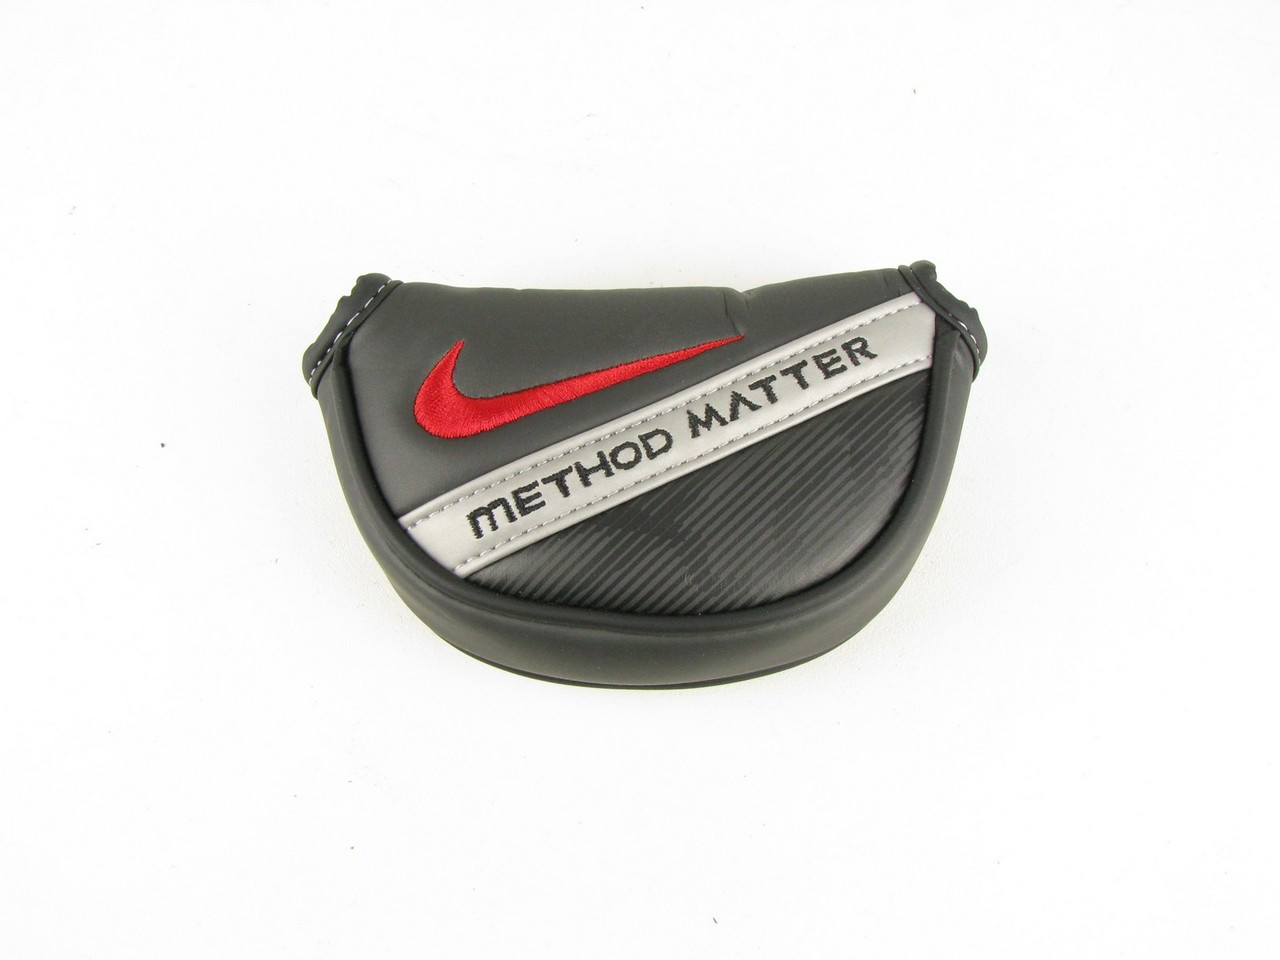 NEW Nike Method Matter MALLET Putter Headcover - Clubs n Covers Golf